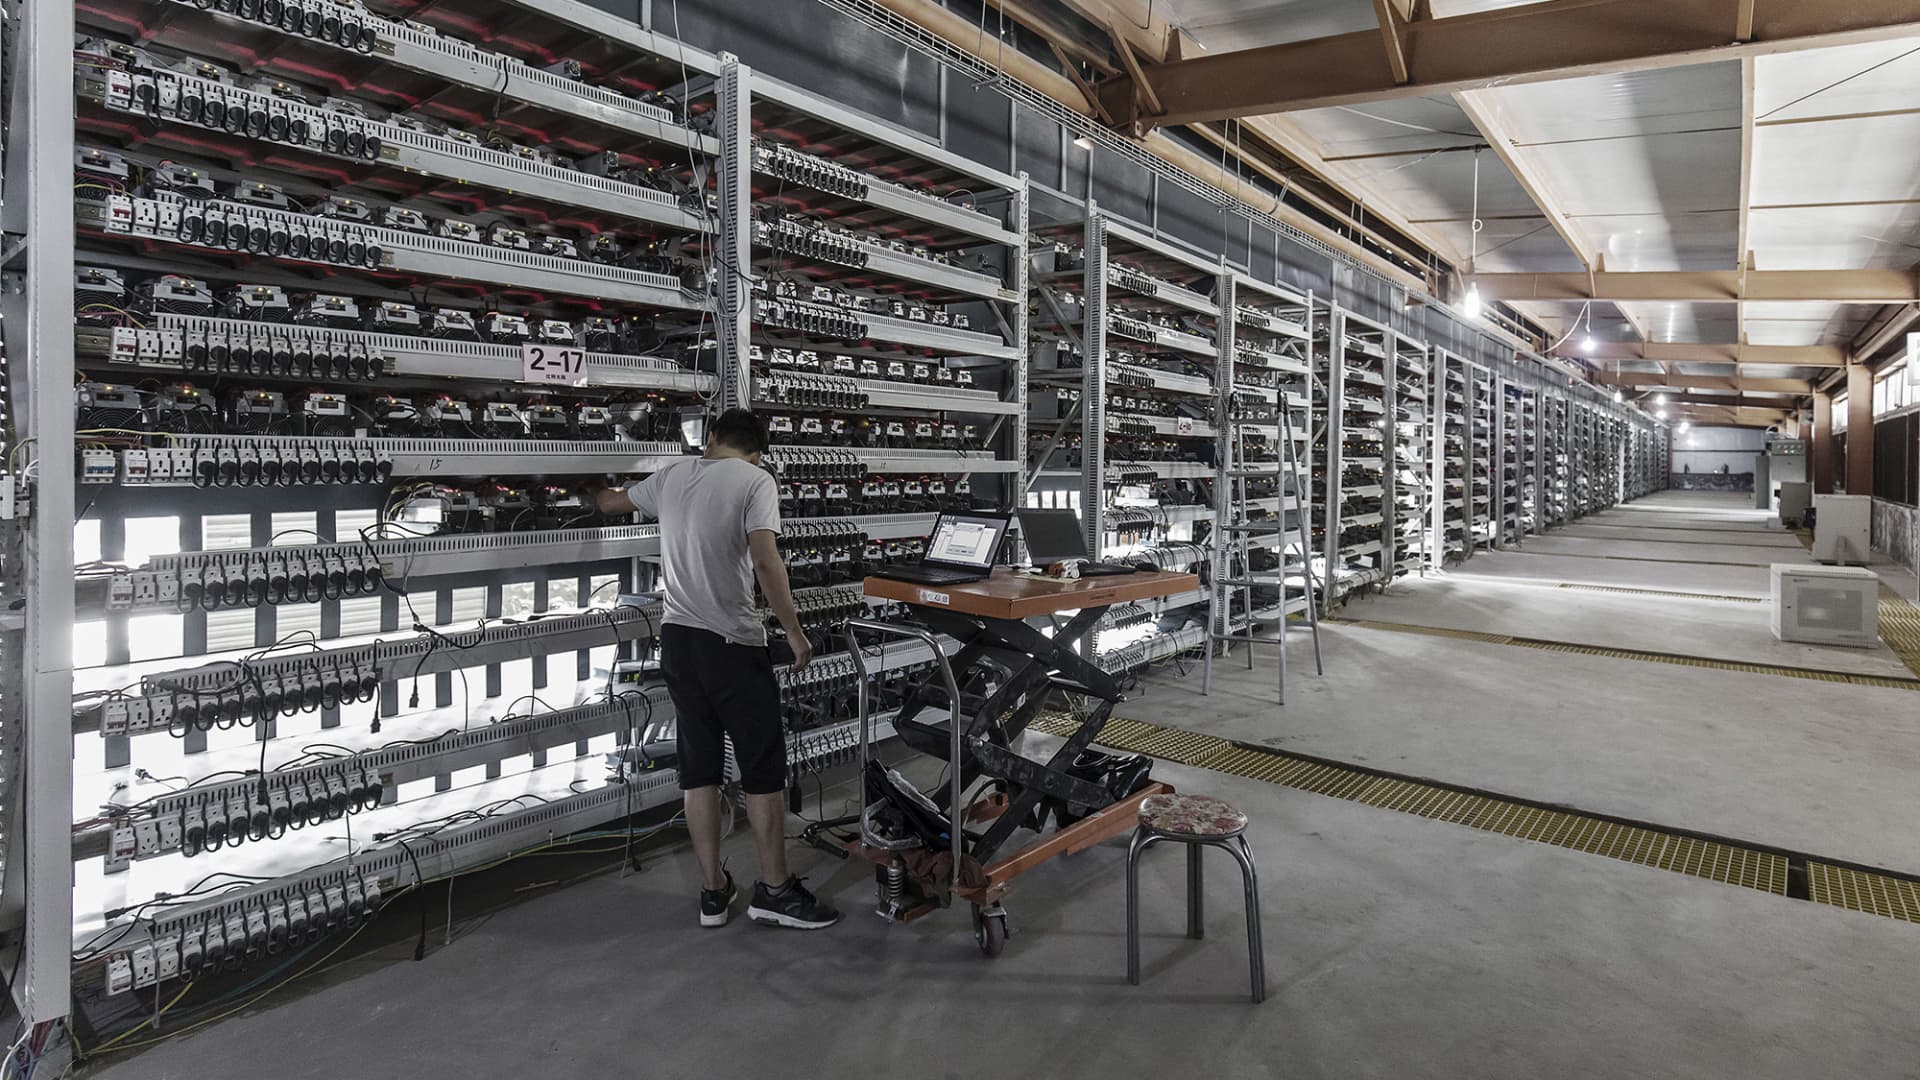 A technician inspects bitcoin mining machines at a mining facility operated by Bitmain Technologies Ltd. in Ordos, Inner Mongolia, China, on Friday, Aug. 11, 2017.